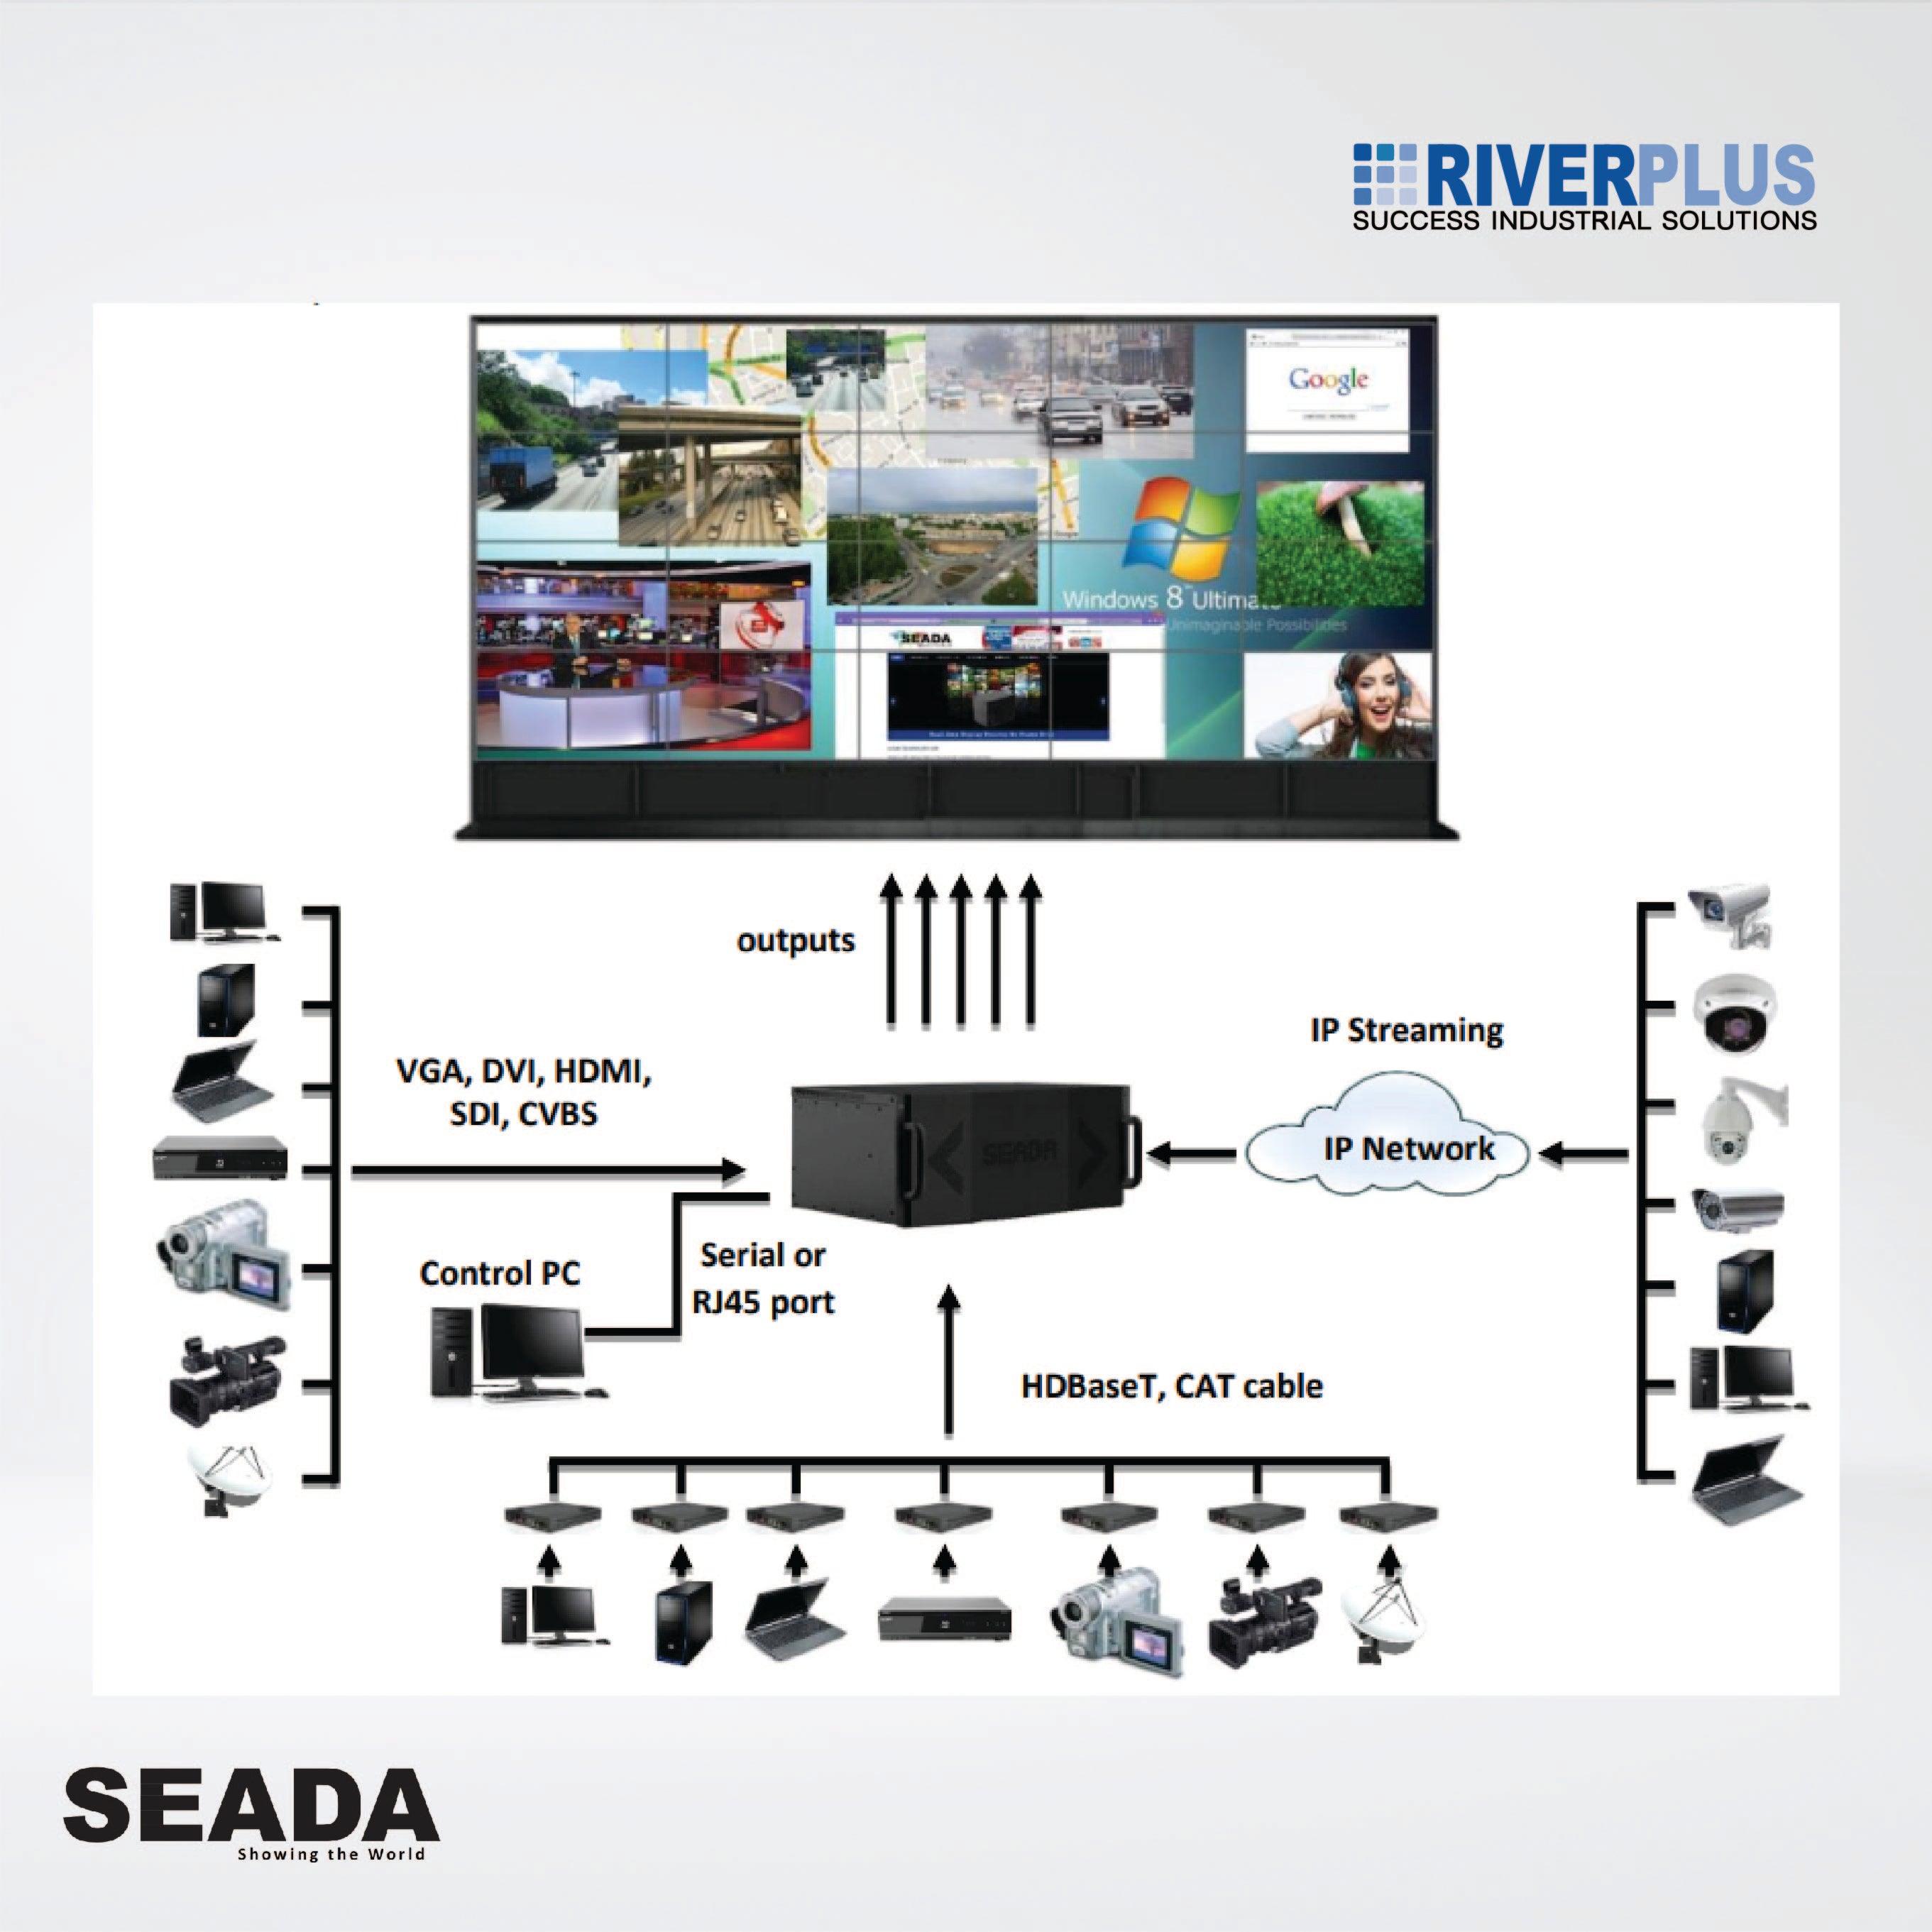 SWP30D CHASSIS 30UD, 320 INPUT/320 OUTPUT ,Video wall controllers are the most Advanced solution - Riverplus